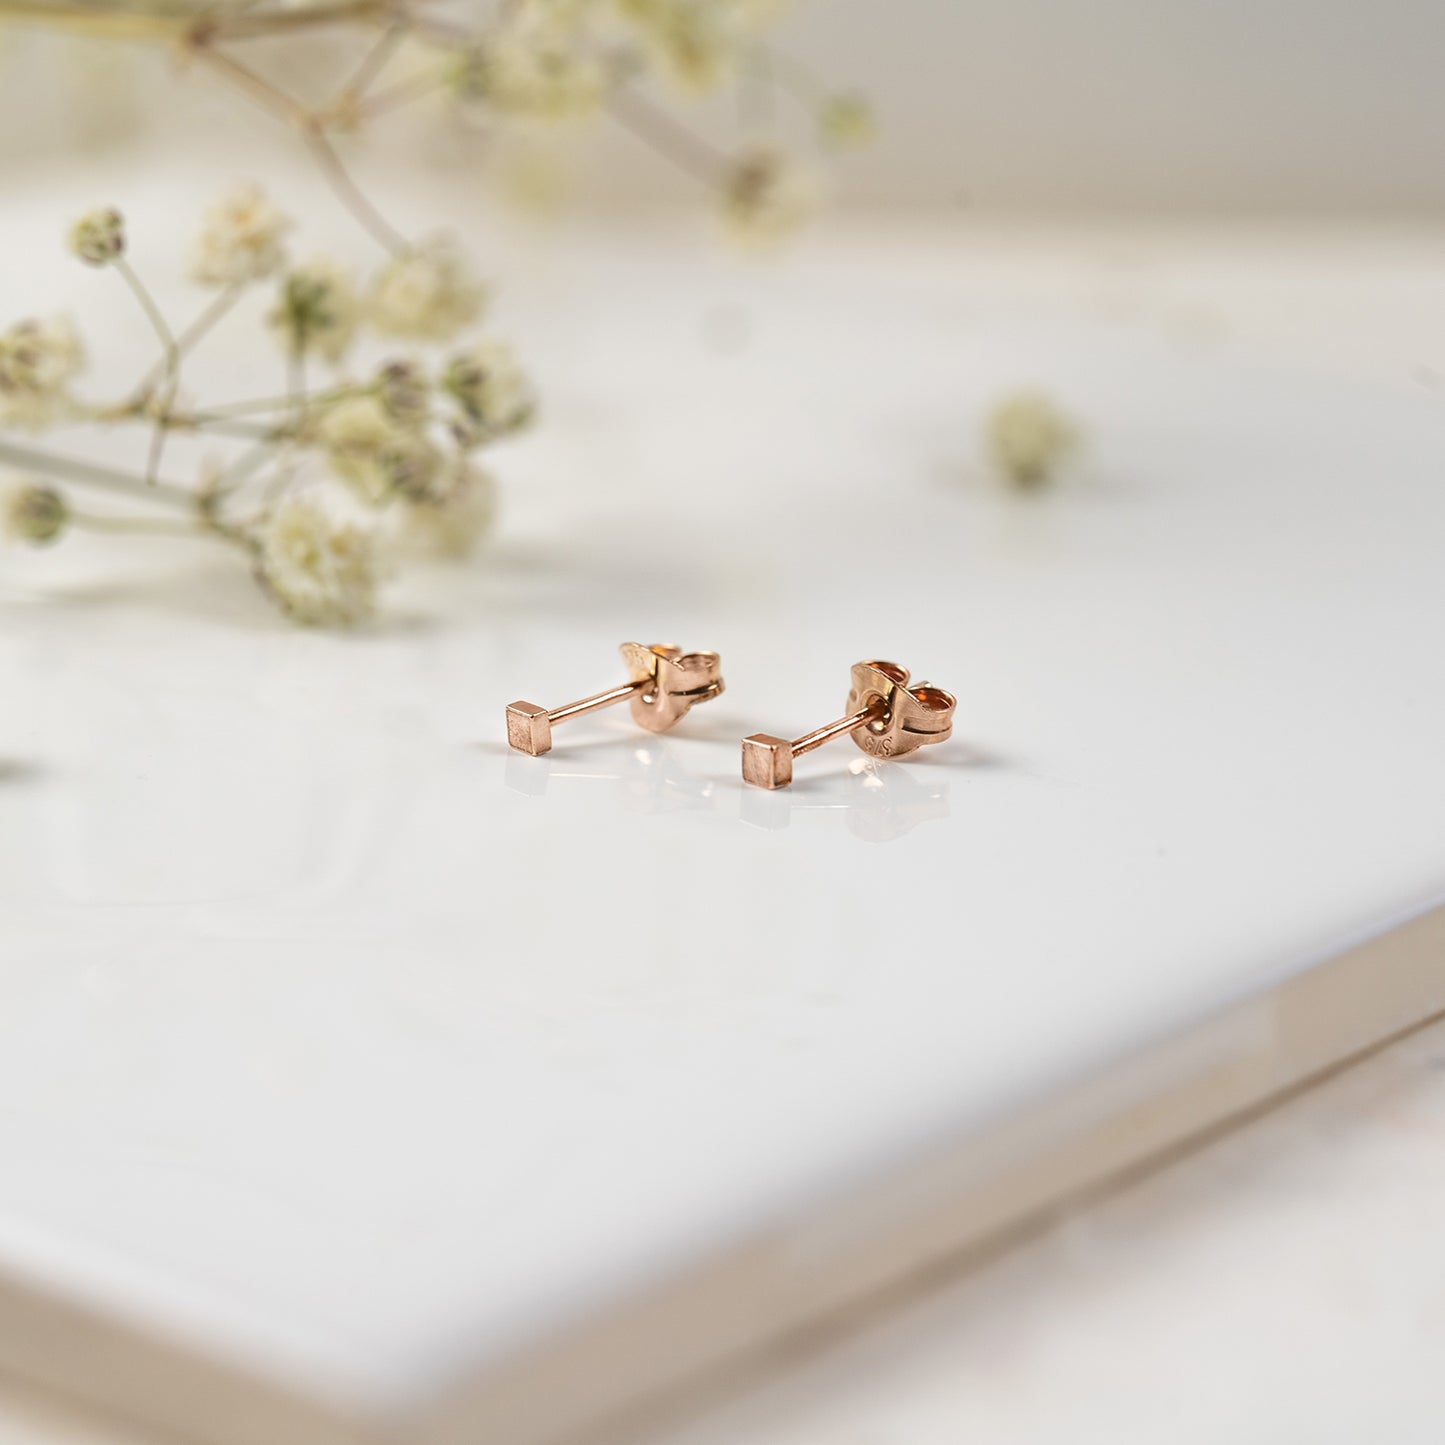 9ct rose gold small square stud earrings.